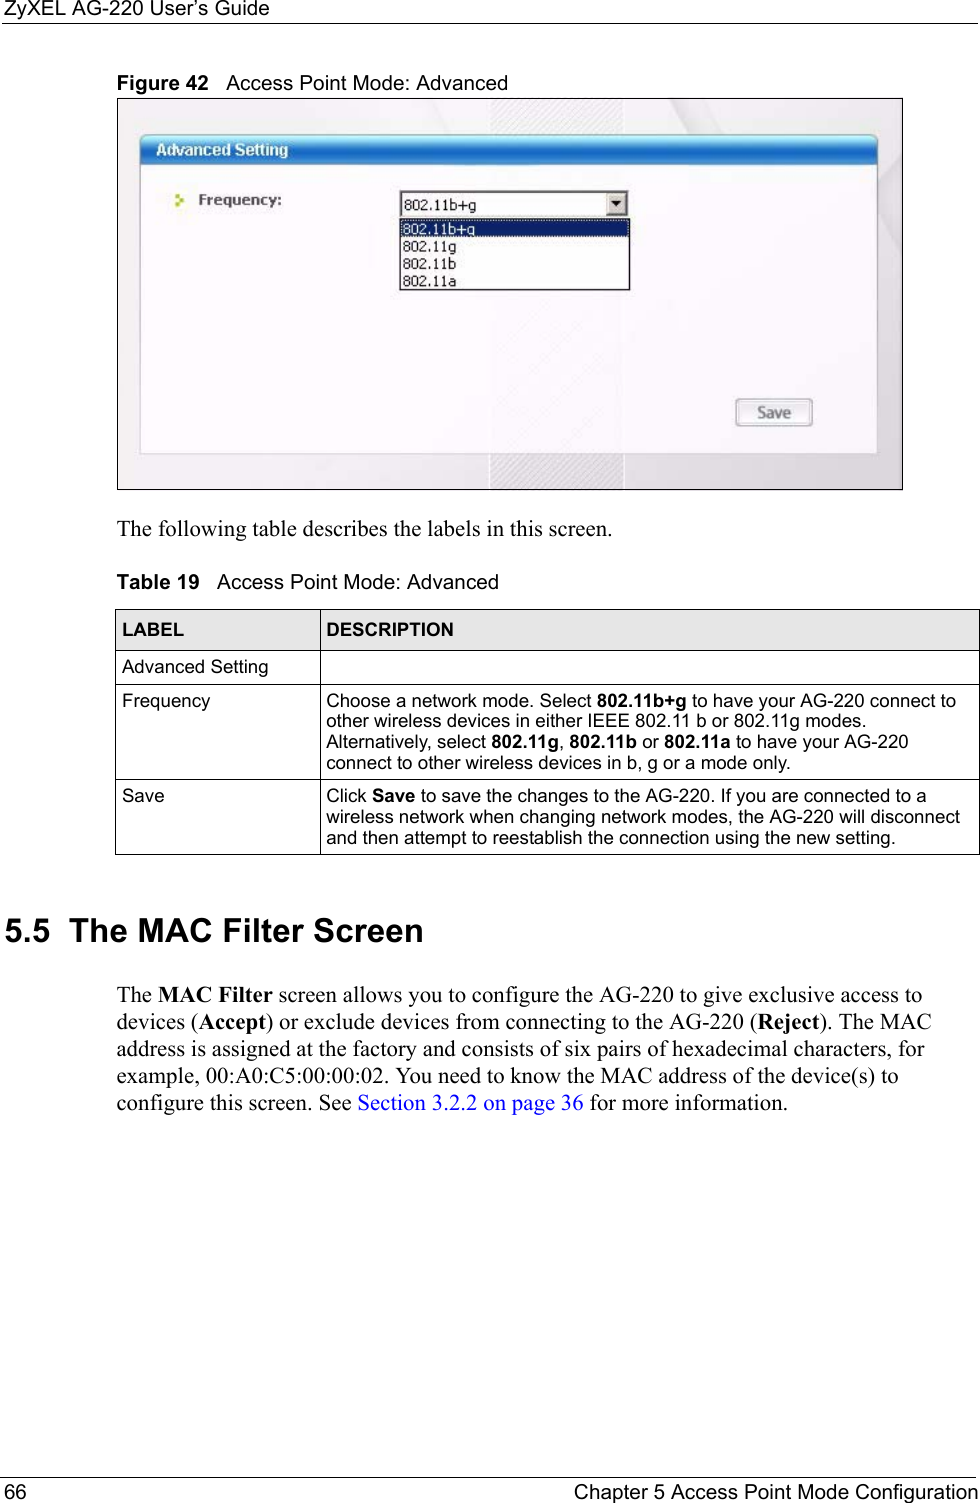 ZyXEL AG-220 User’s Guide66 Chapter 5 Access Point Mode ConfigurationFigure 42   Access Point Mode: AdvancedThe following table describes the labels in this screen.5.5  The MAC Filter Screen The MAC Filter screen allows you to configure the AG-220 to give exclusive access to  devices (Accept) or exclude devices from connecting to the AG-220 (Reject). The MAC address is assigned at the factory and consists of six pairs of hexadecimal characters, for example, 00:A0:C5:00:00:02. You need to know the MAC address of the device(s) to configure this screen. See Section 3.2.2 on page 36 for more information.Table 19   Access Point Mode: AdvancedLABEL DESCRIPTIONAdvanced SettingFrequency Choose a network mode. Select 802.11b+g to have your AG-220 connect to other wireless devices in either IEEE 802.11 b or 802.11g modes. Alternatively, select 802.11g, 802.11b or 802.11a to have your AG-220 connect to other wireless devices in b, g or a mode only.Save Click Save to save the changes to the AG-220. If you are connected to a wireless network when changing network modes, the AG-220 will disconnect and then attempt to reestablish the connection using the new setting.